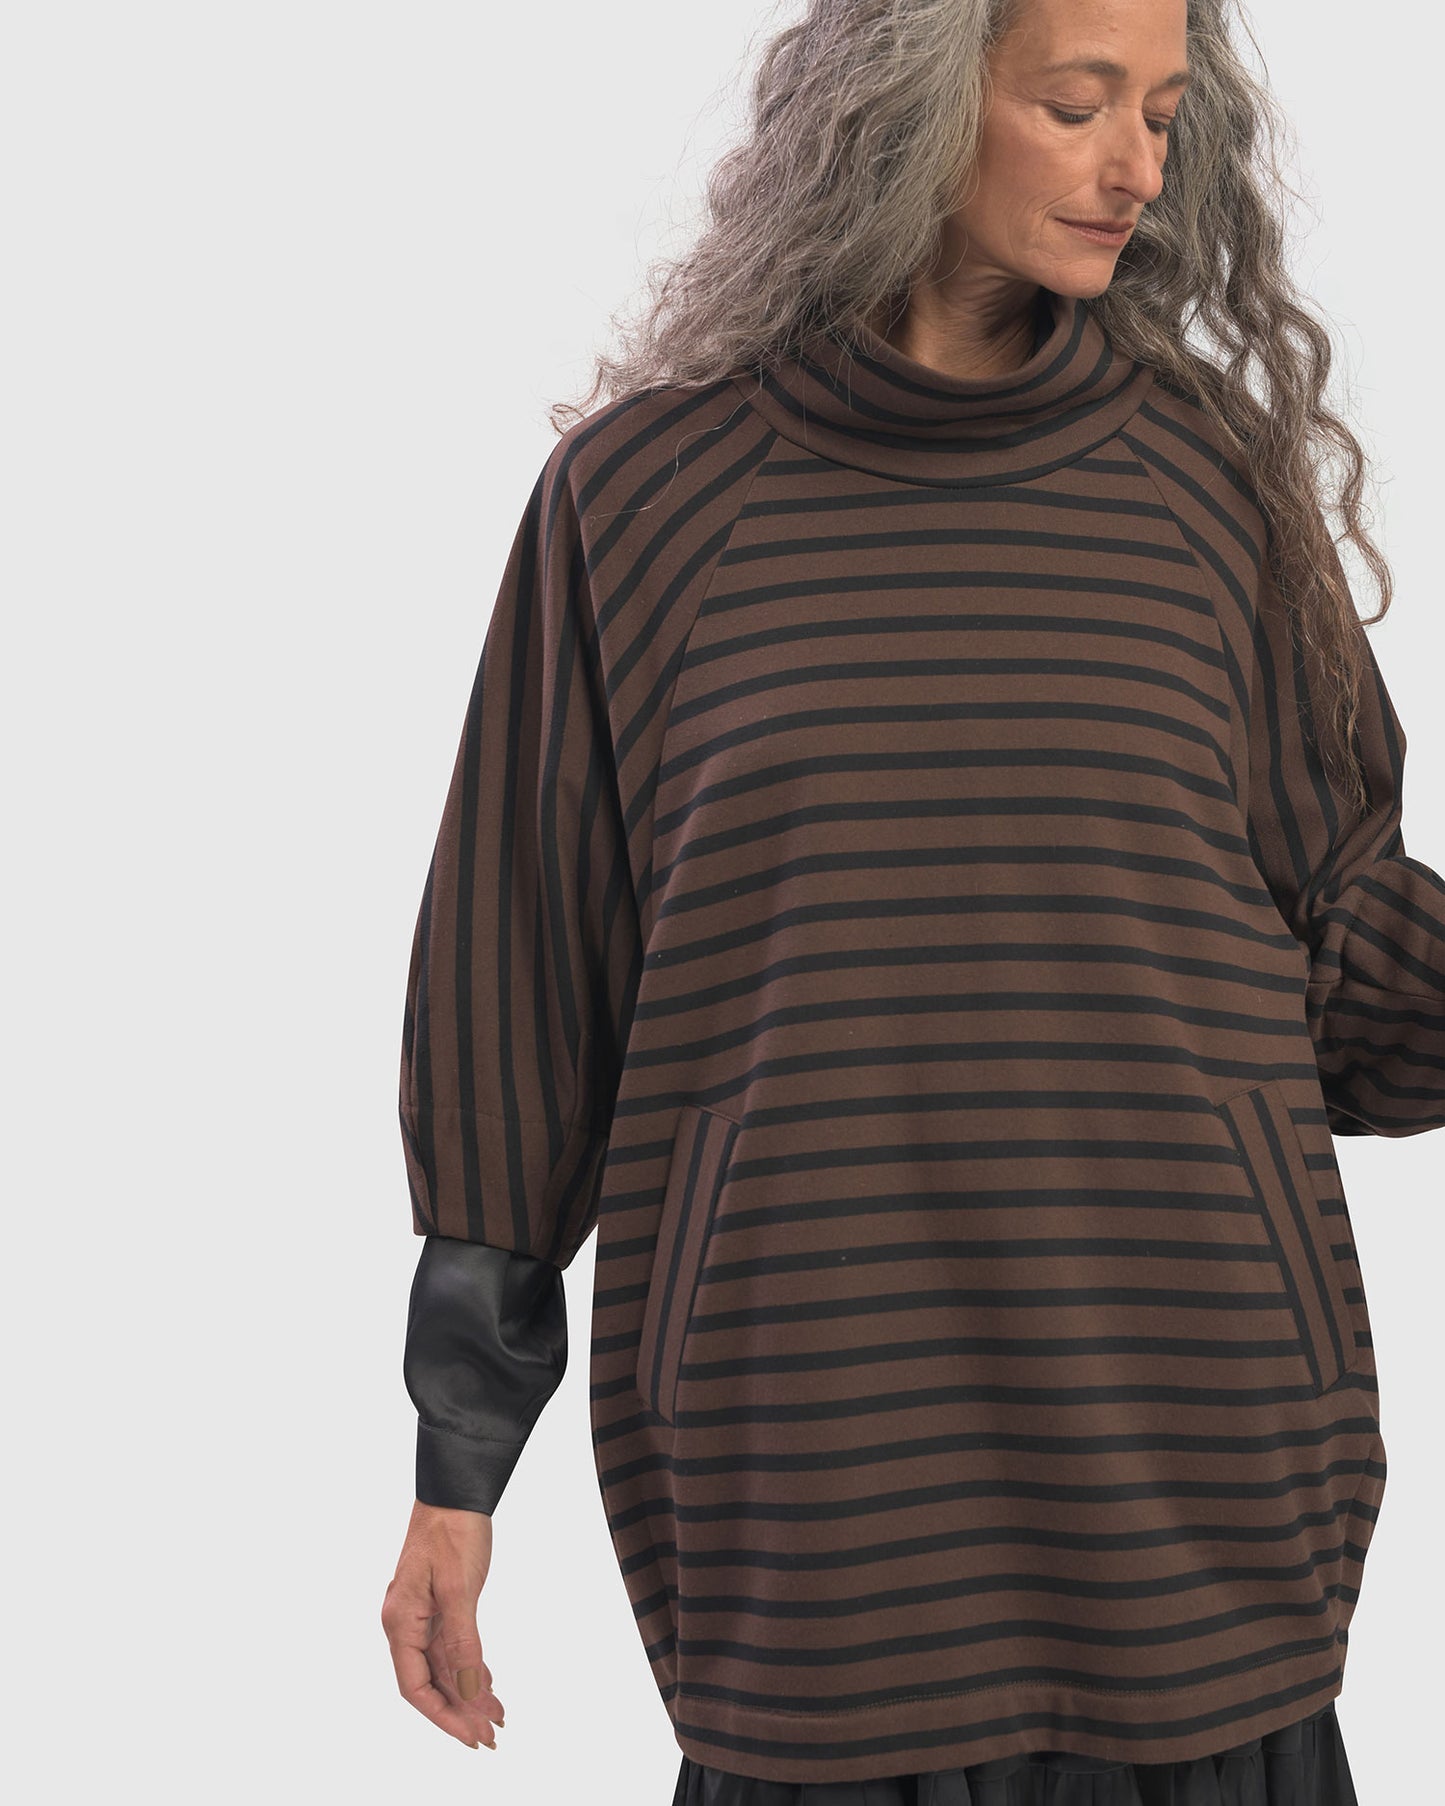 Urban Cocoon Tunic Top, Stripes by Alembika